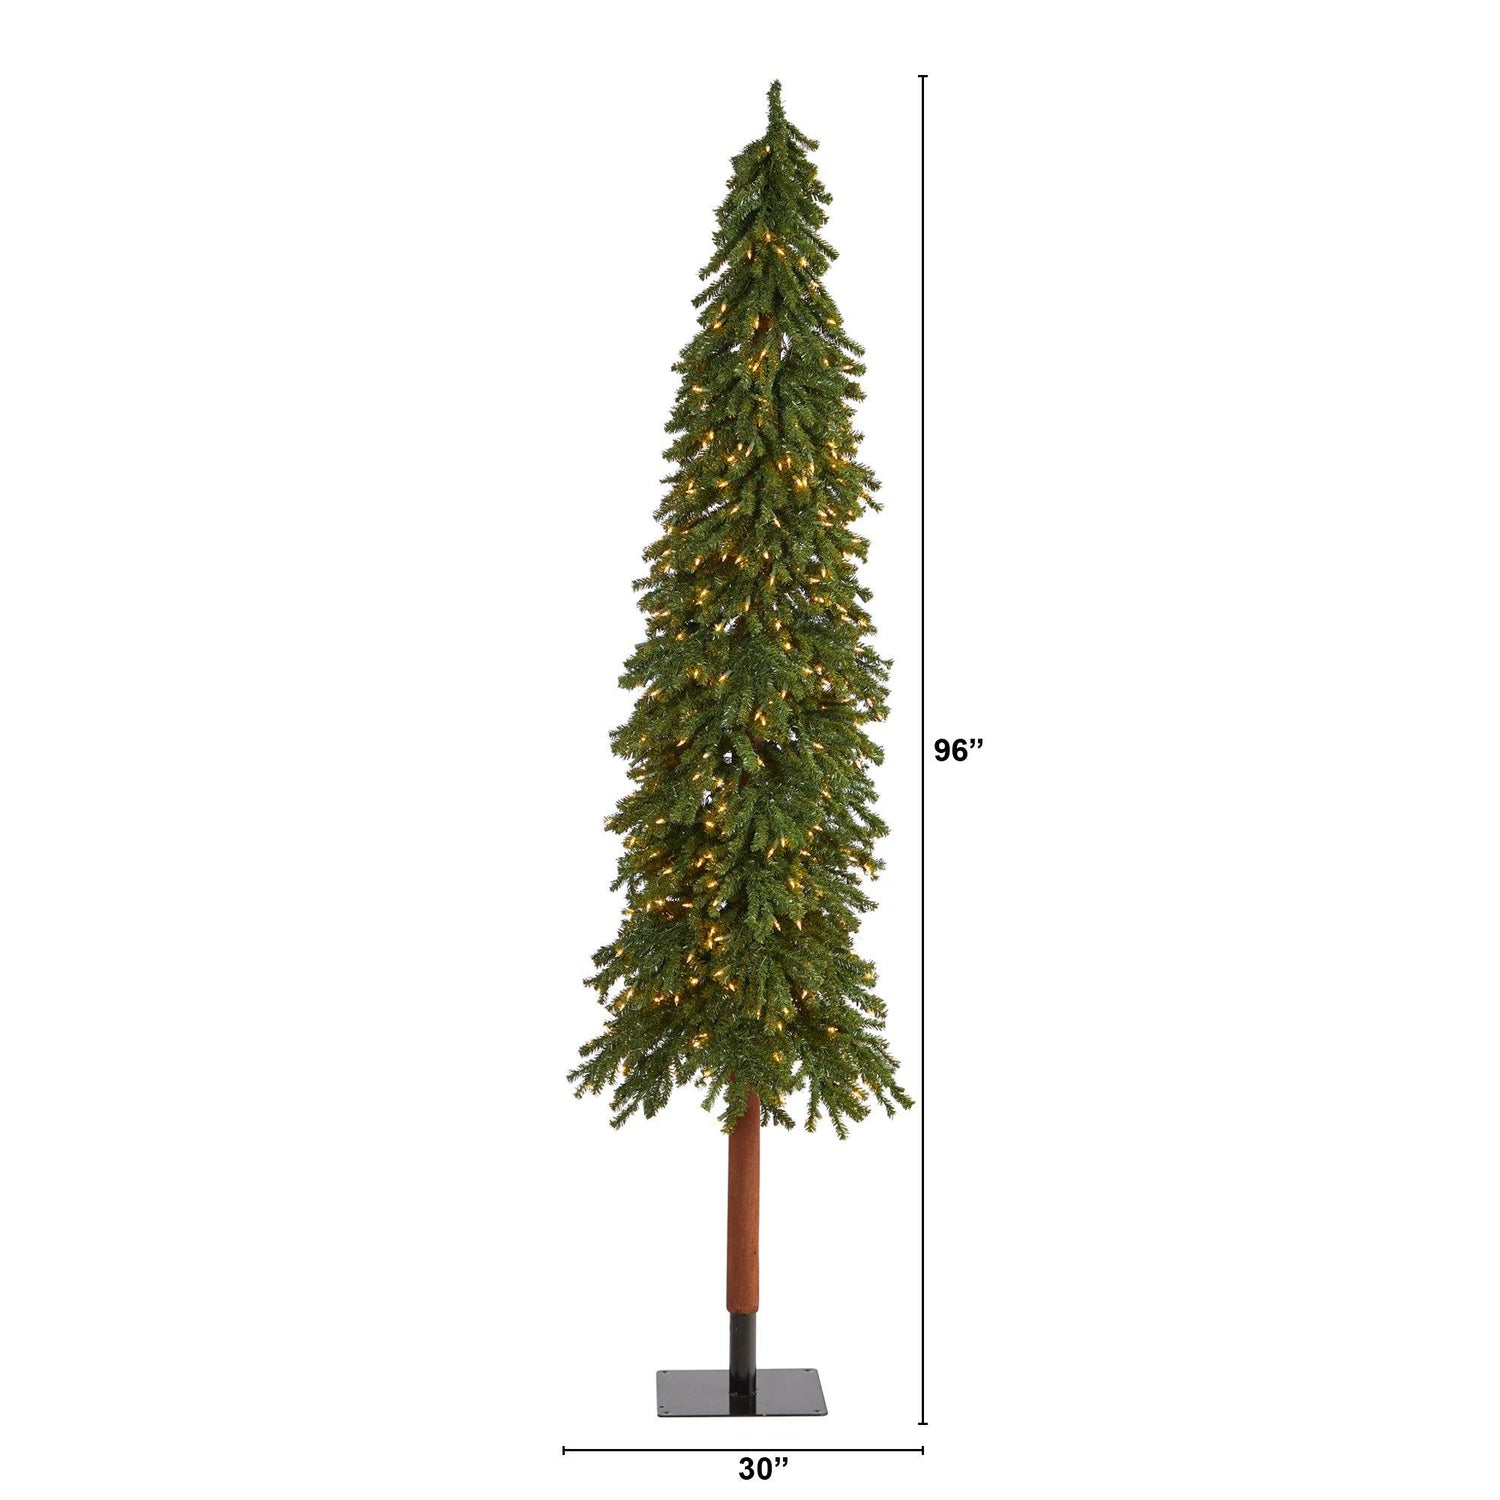 8’ Grand Alpine Artificial Christmas Tree with 500 Clear Lights and 1051 Branches on Natural Trunk